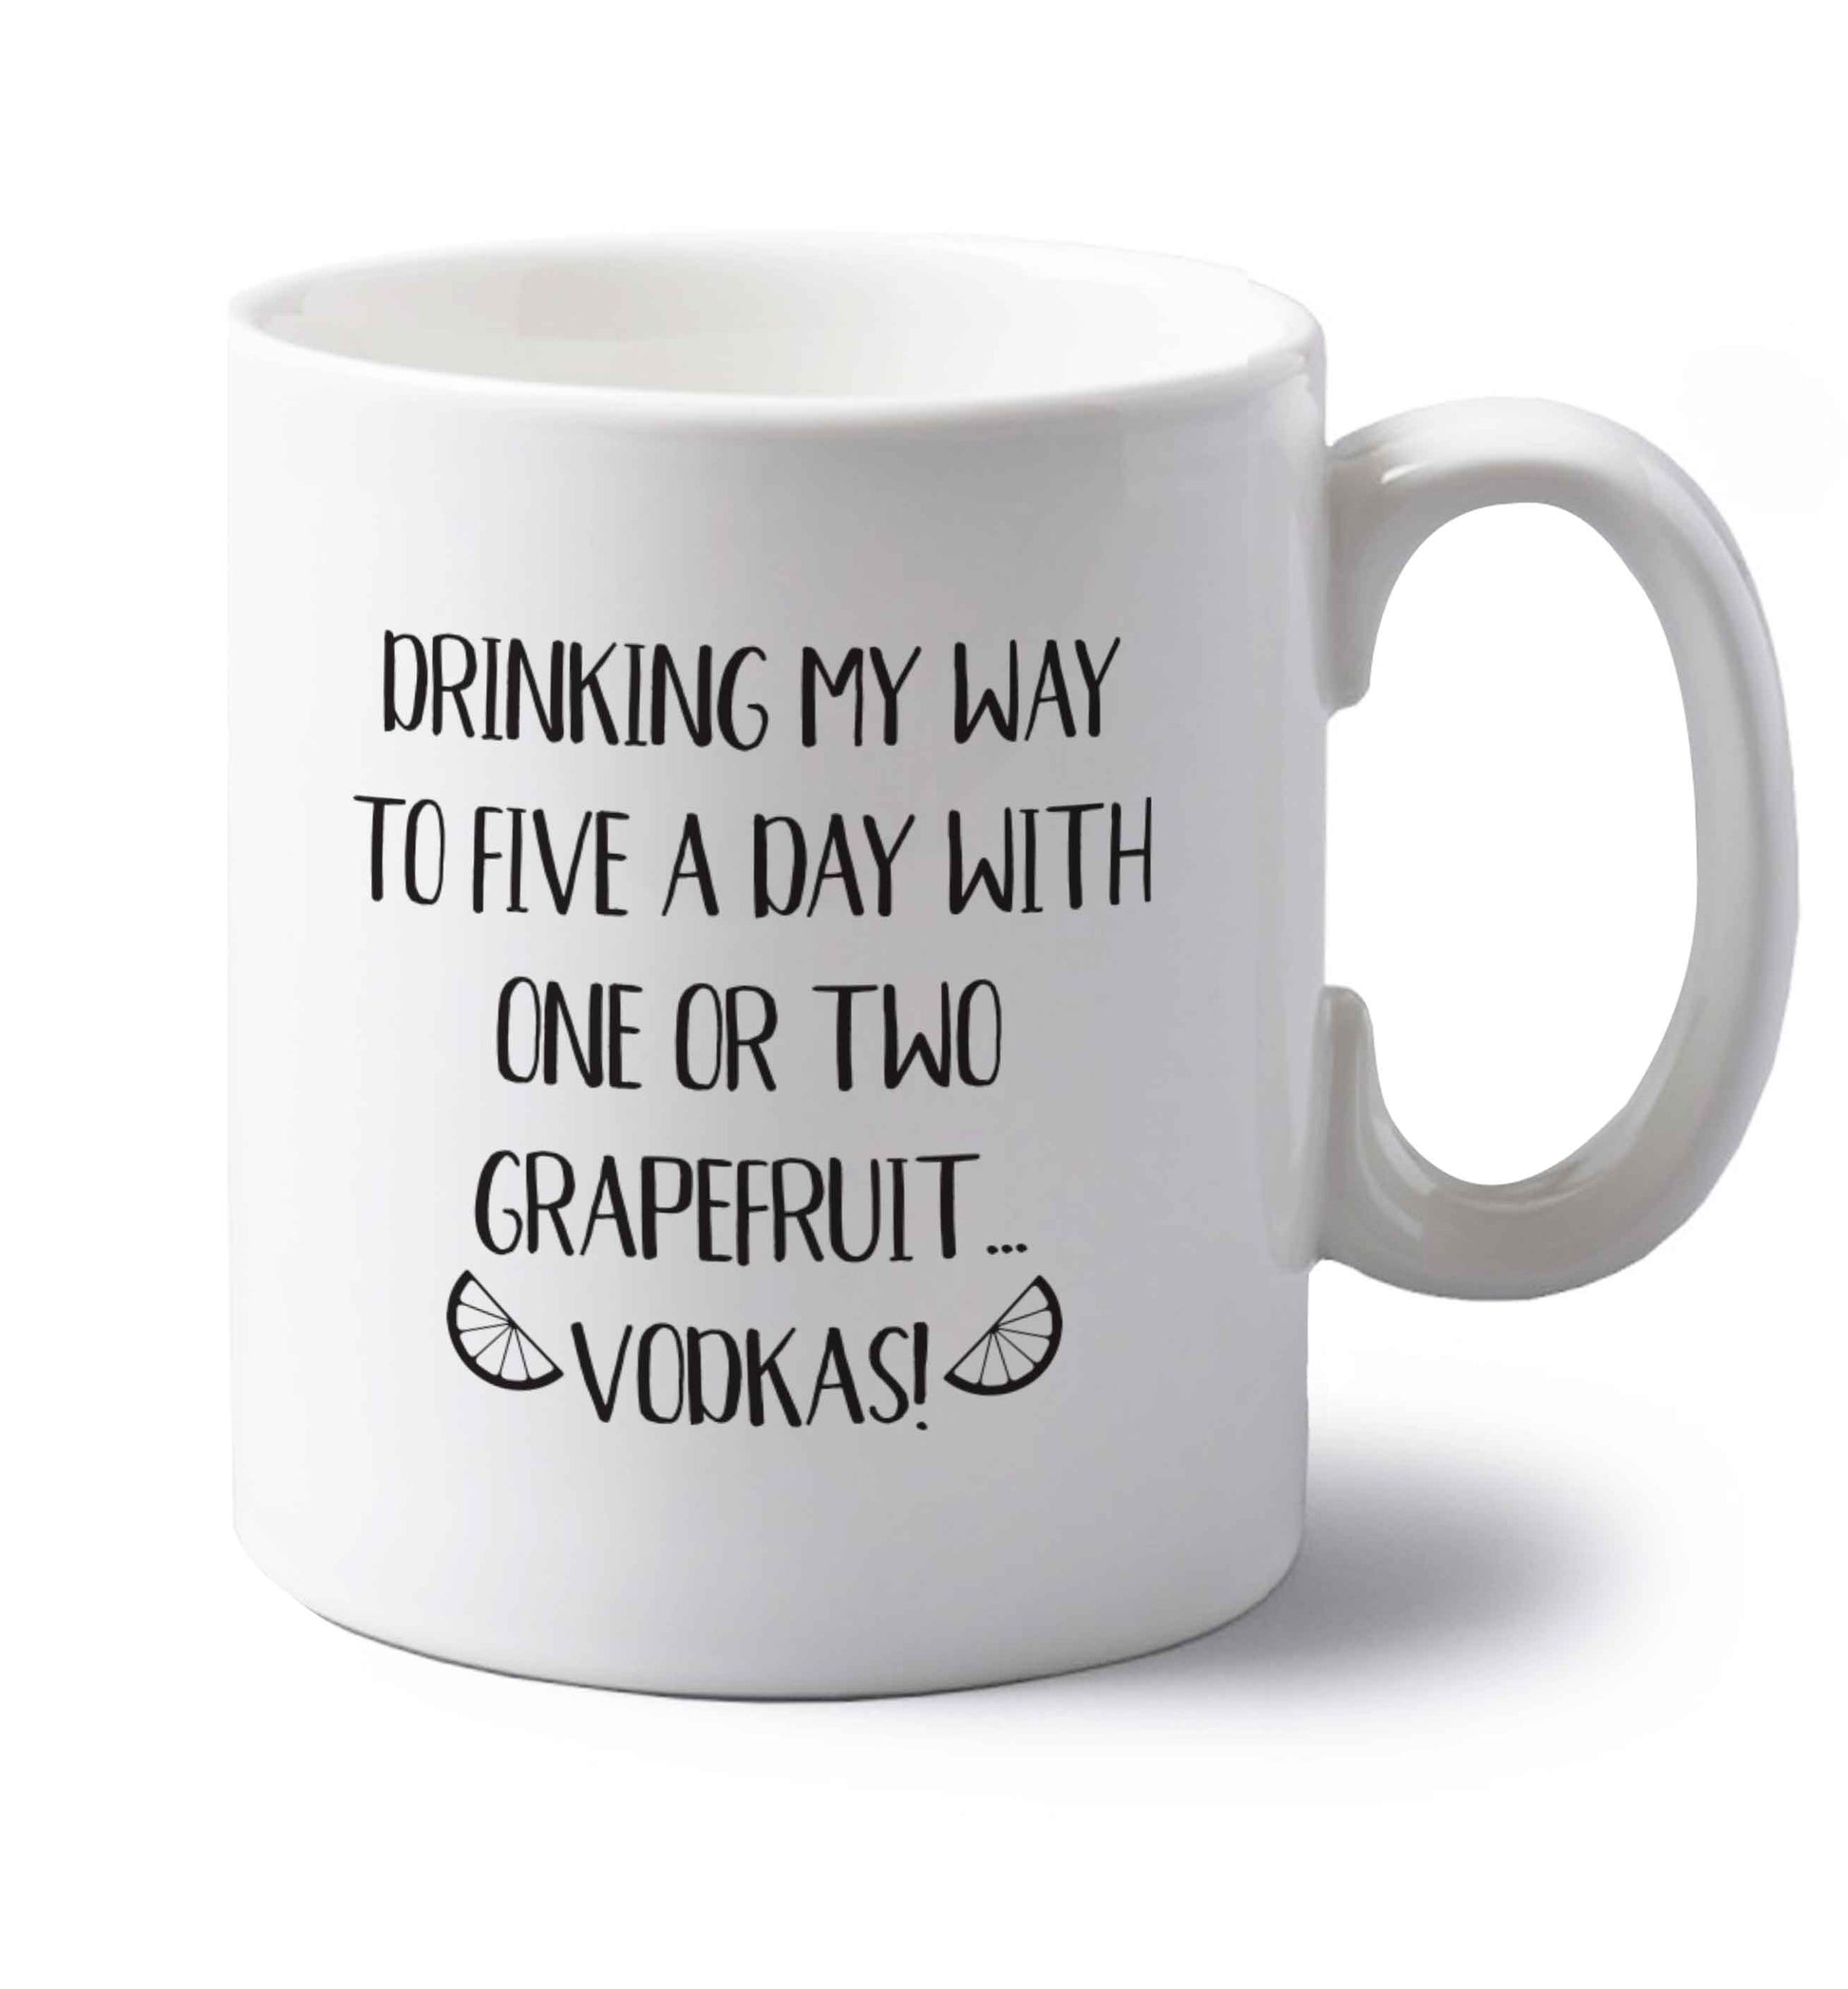 Drinking my way to five a day with one or two grapefruit vodkas left handed white ceramic mug 